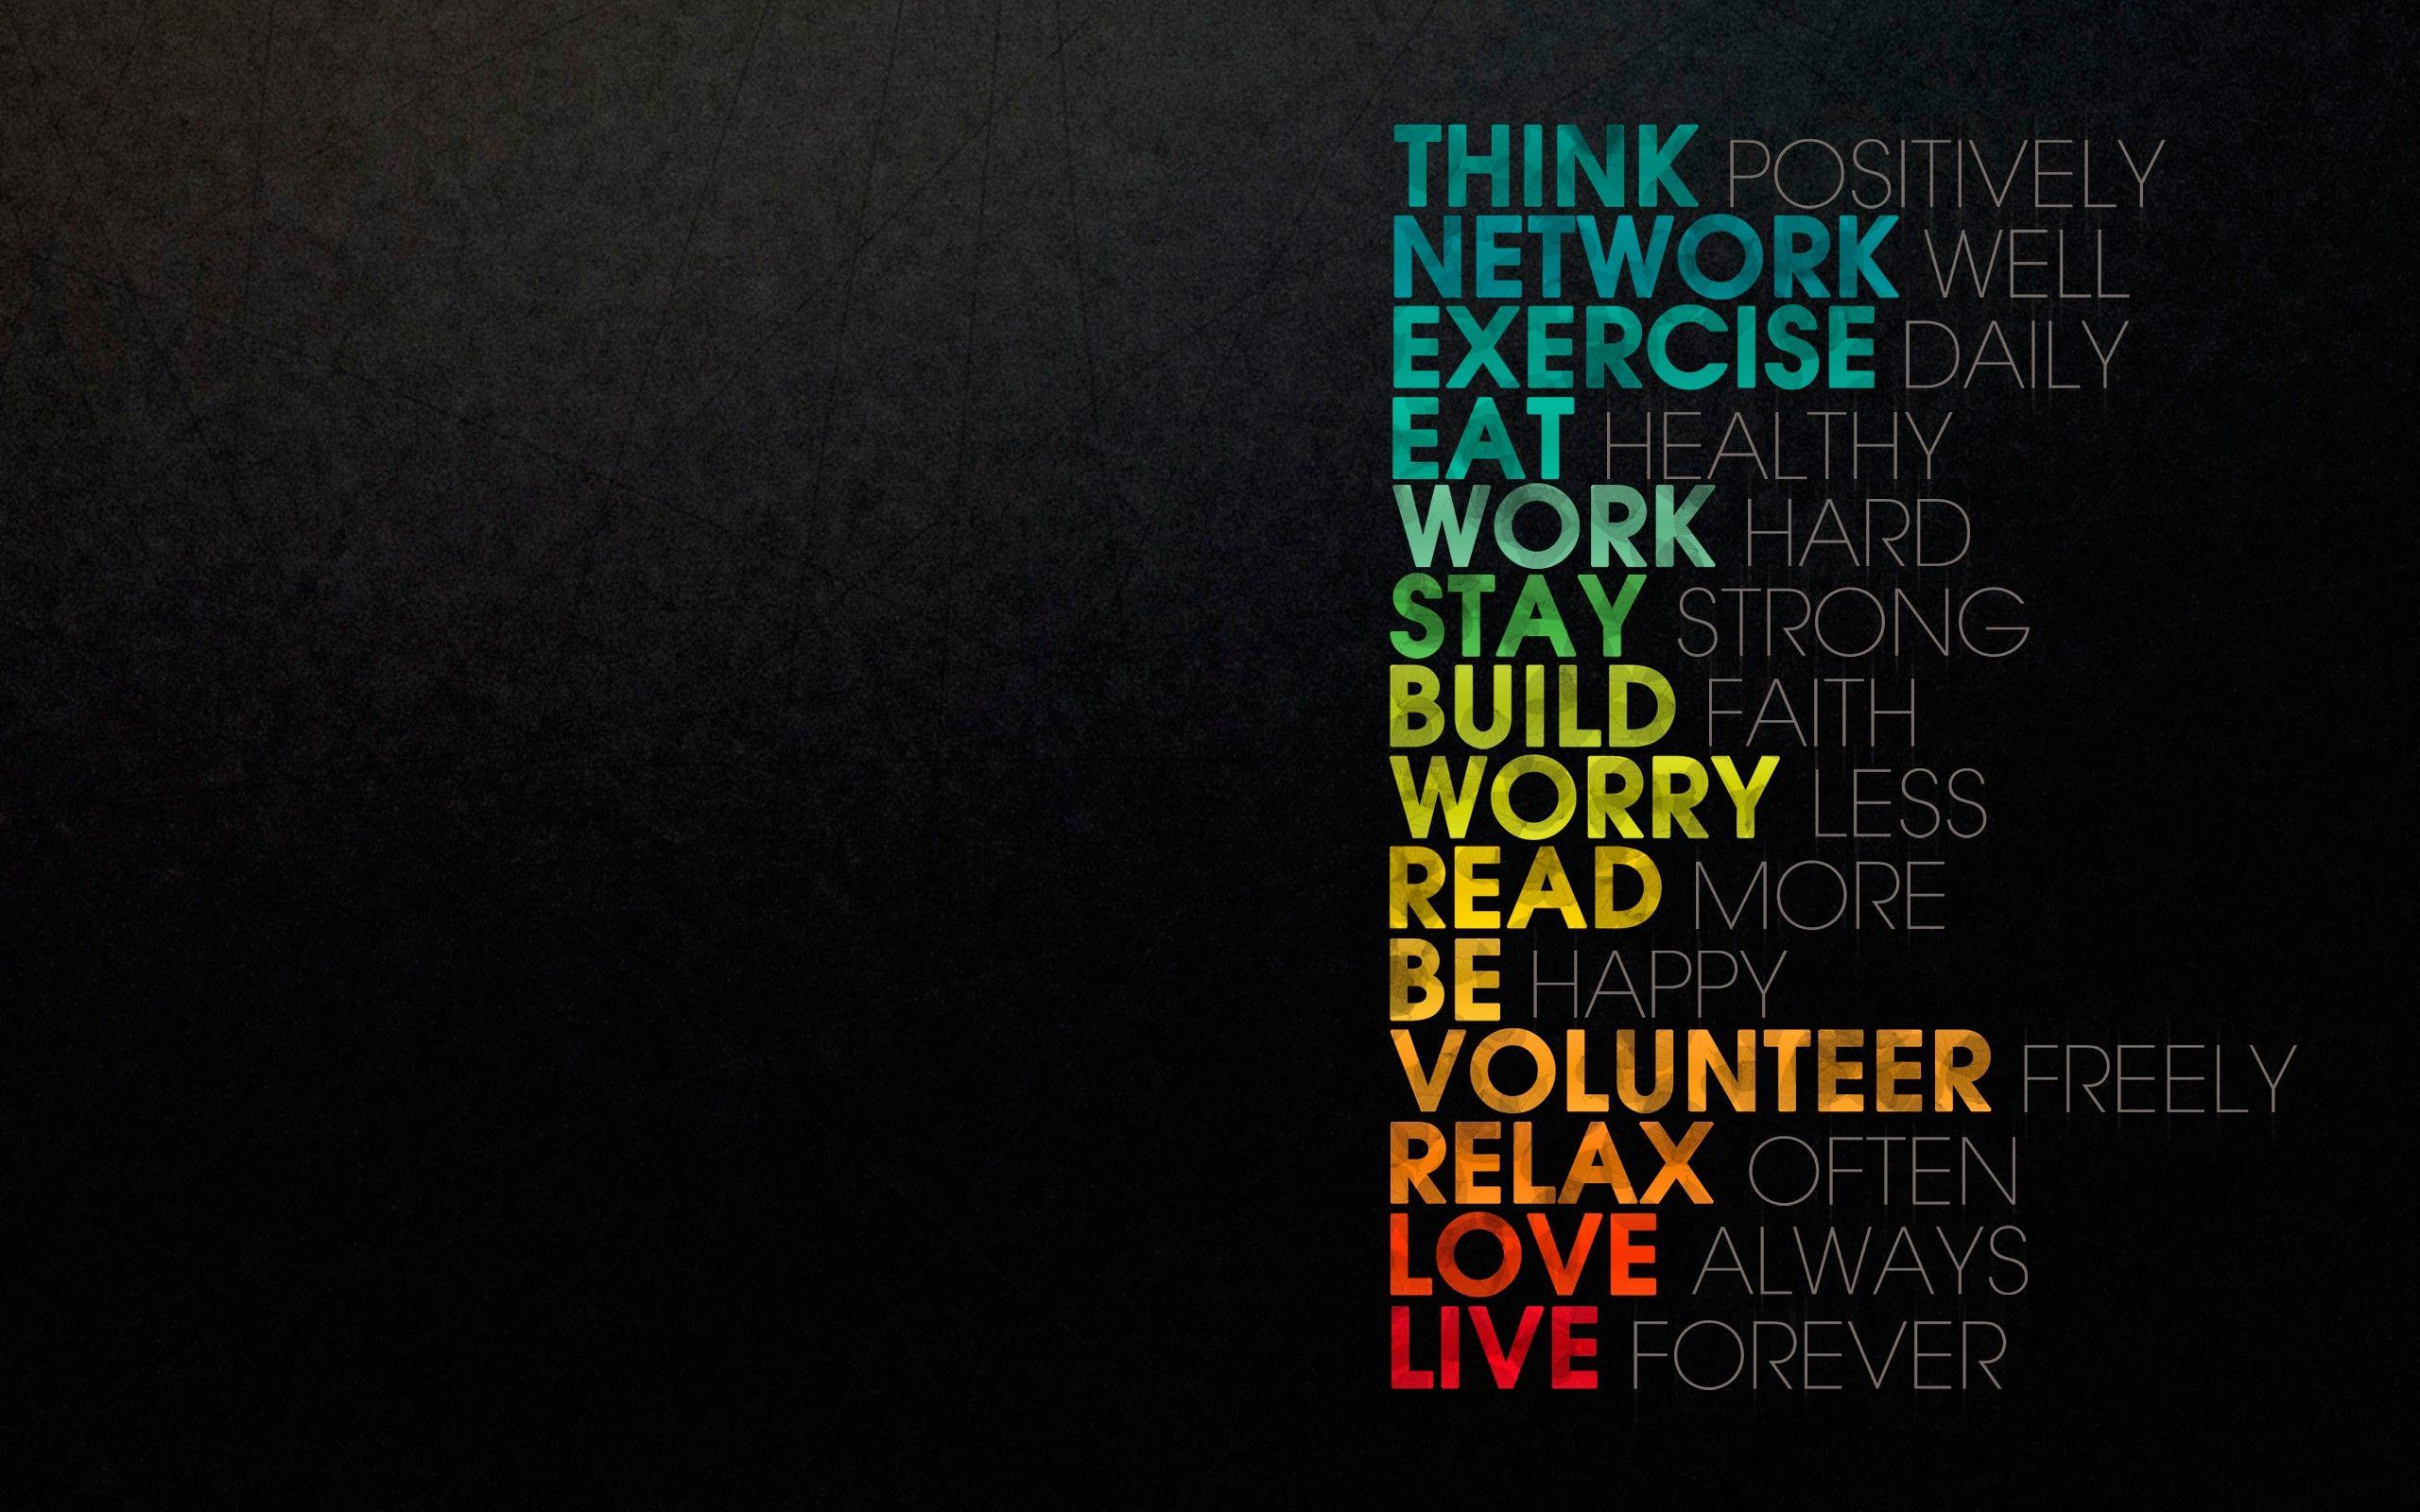 Inspiring Wallpaper with Inspiring Thoughts